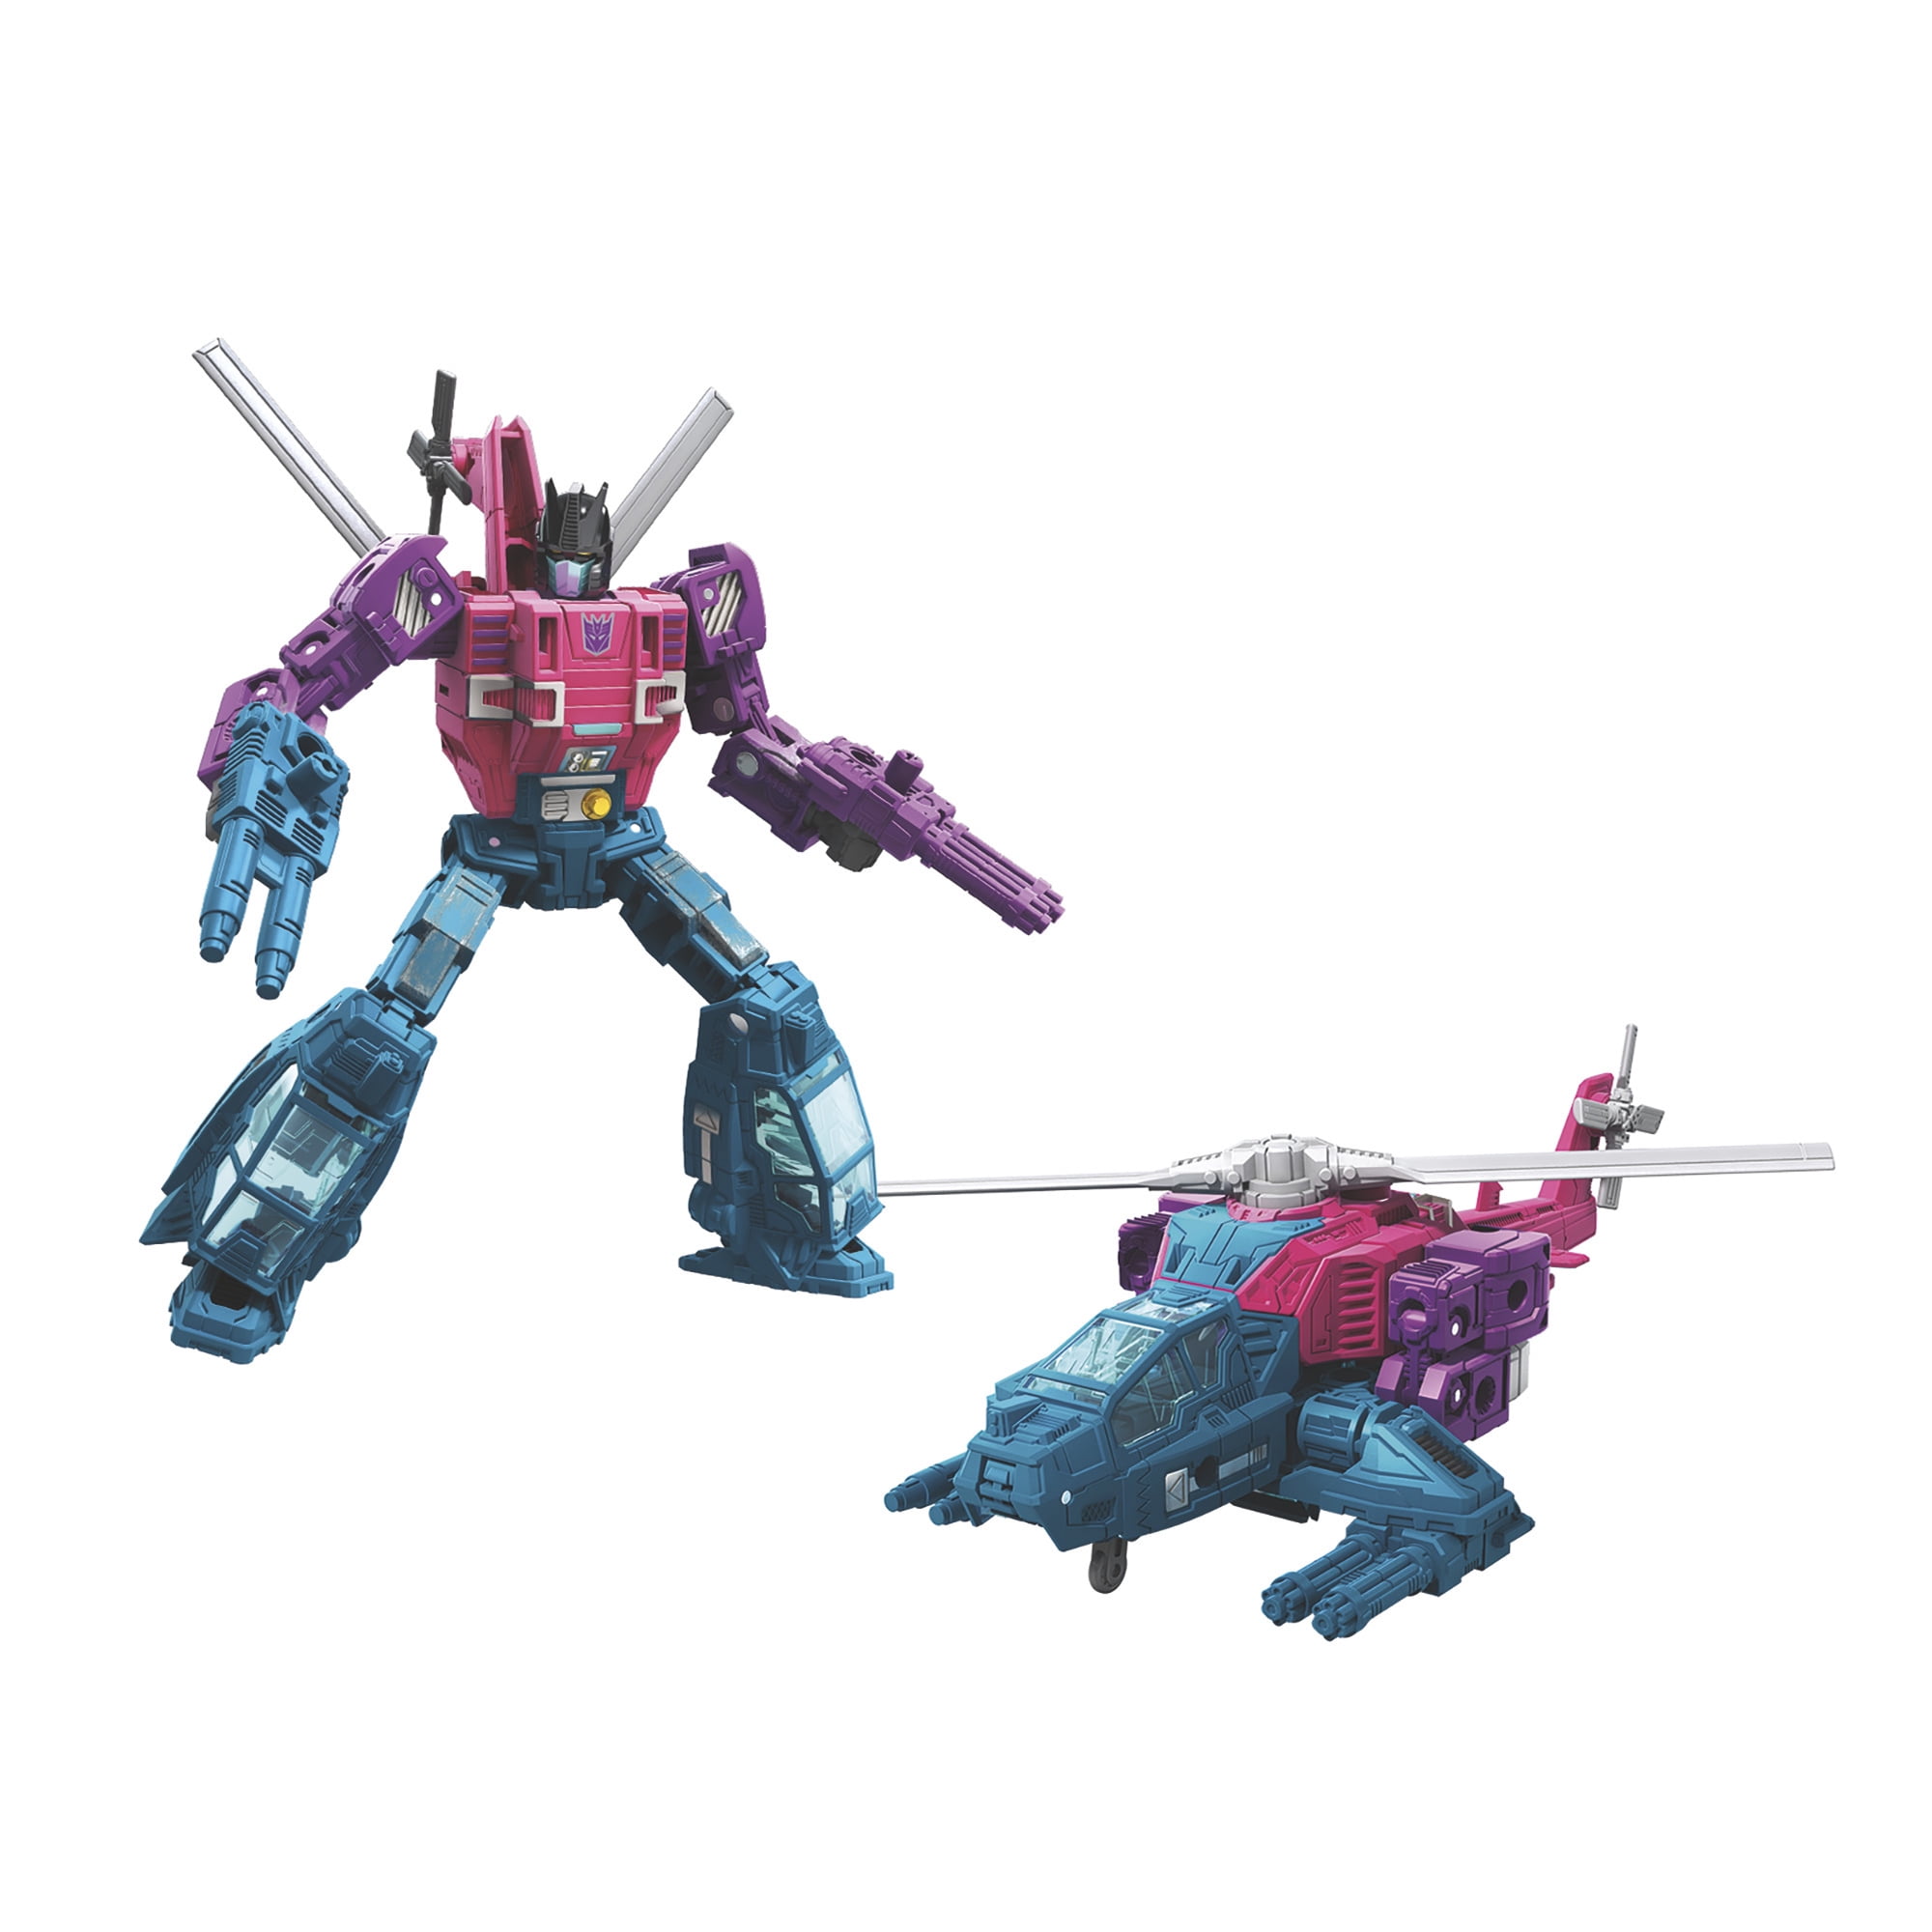 Transformers Generations War for Cybertron Deluxe WFC-S48 SpinIster Figure